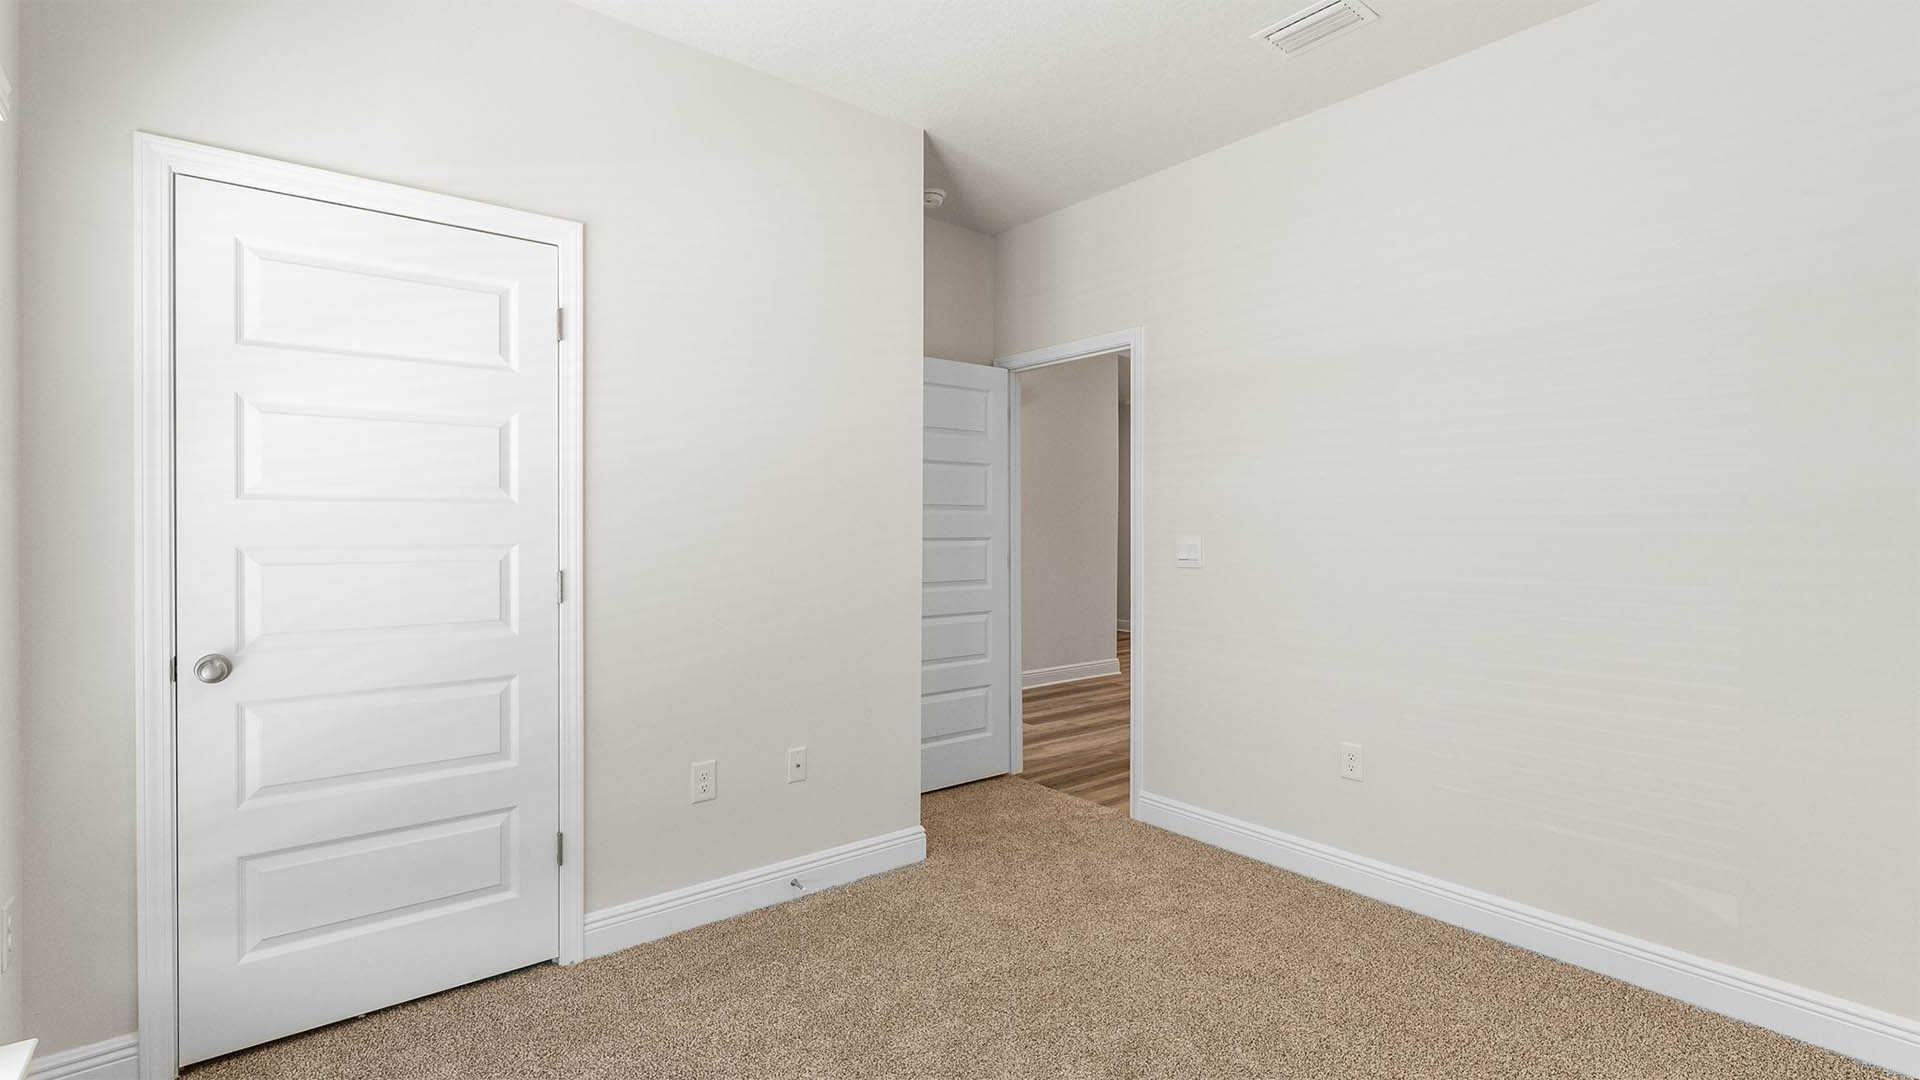 Bedroom with carpet floors and closet.